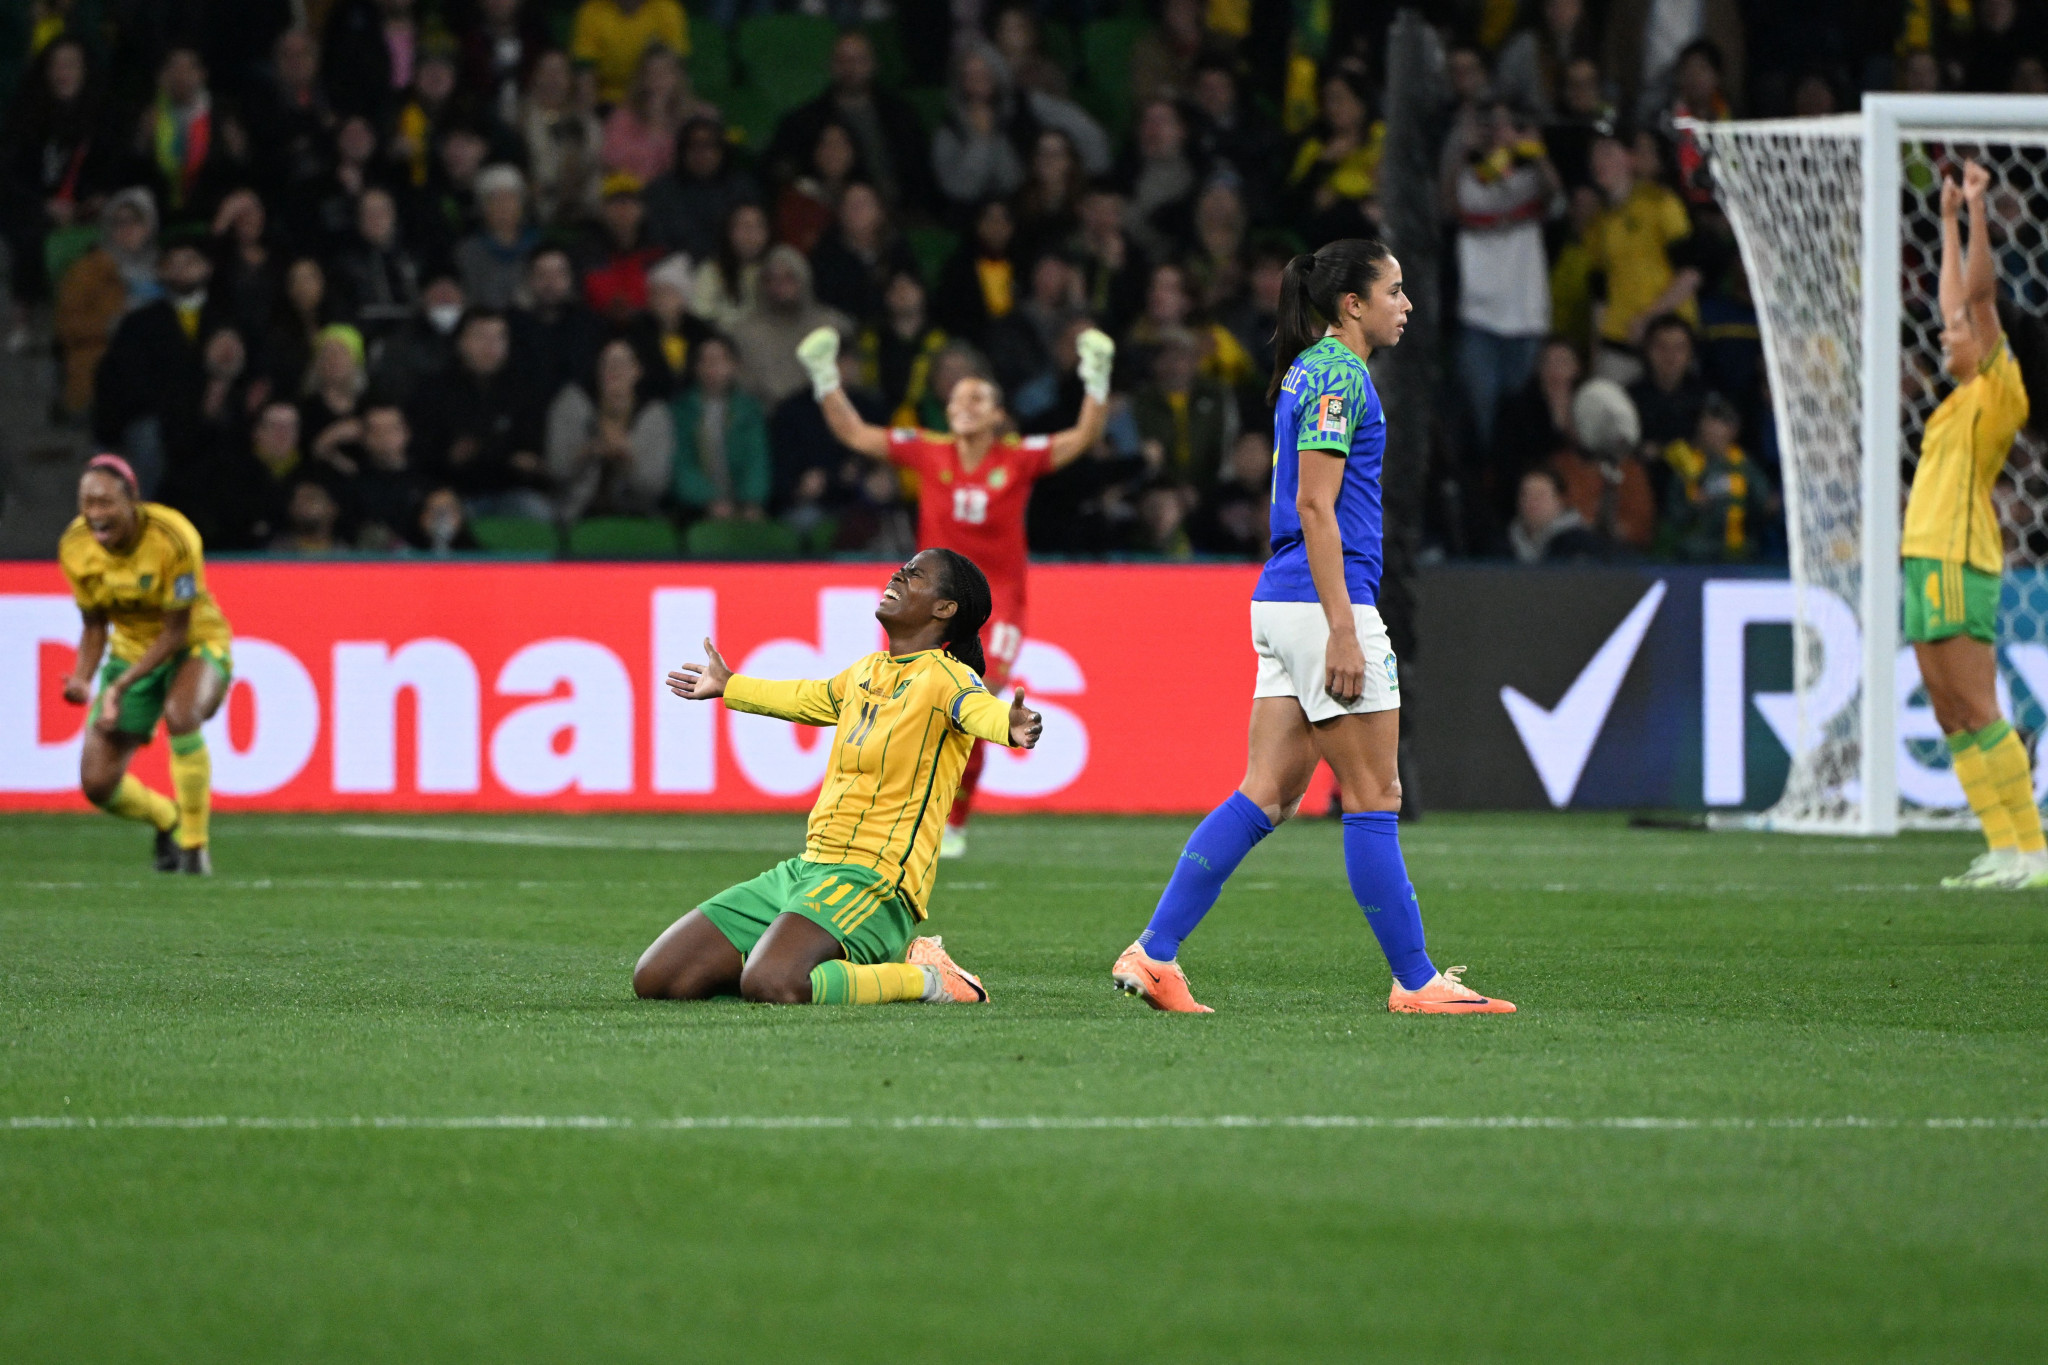 Jamaica draw eliminates Brazil from FIFA Women's World Cup